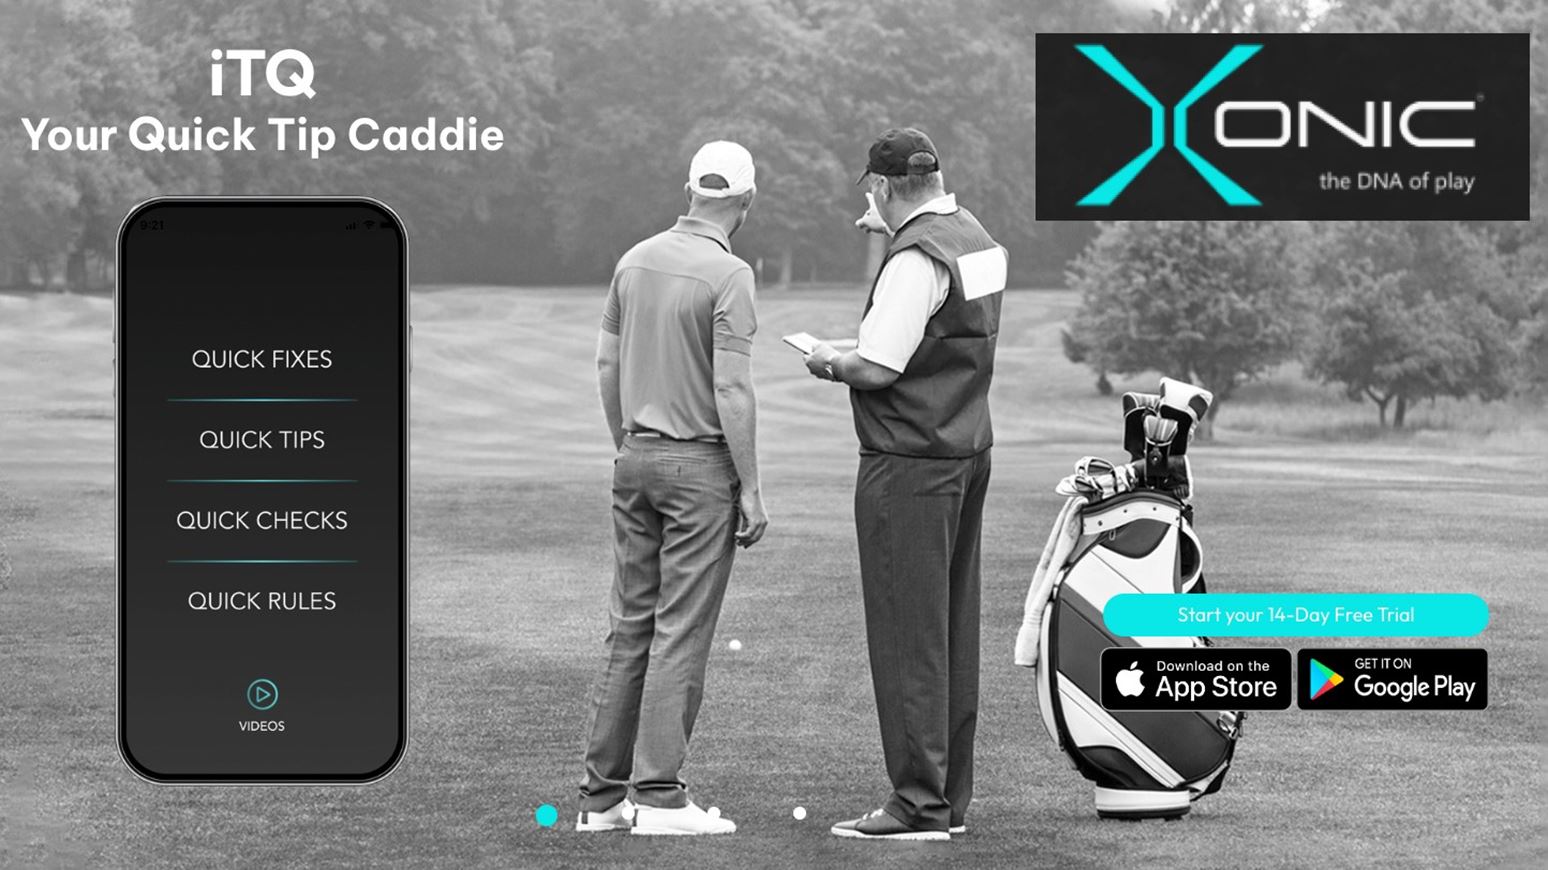 Xonic Golf - Your quick tip caddy